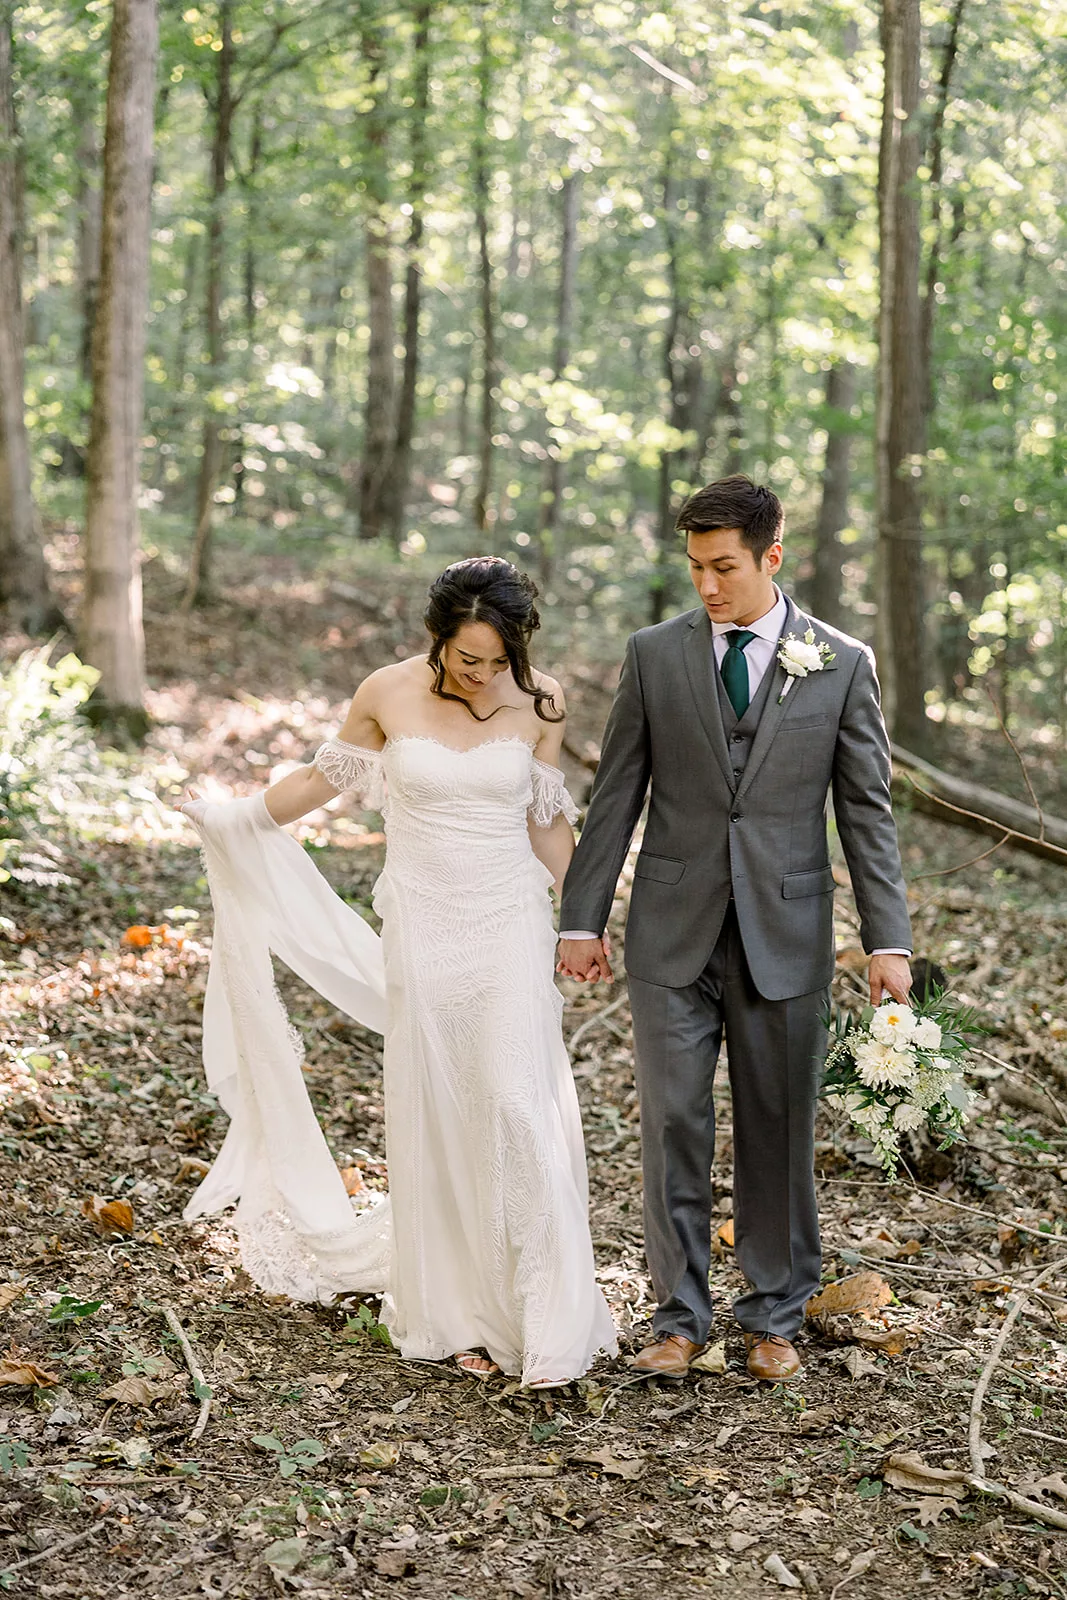 Newlyweds walk hand in hand through a forest trail at one of the best Sustainable Wedding Venue